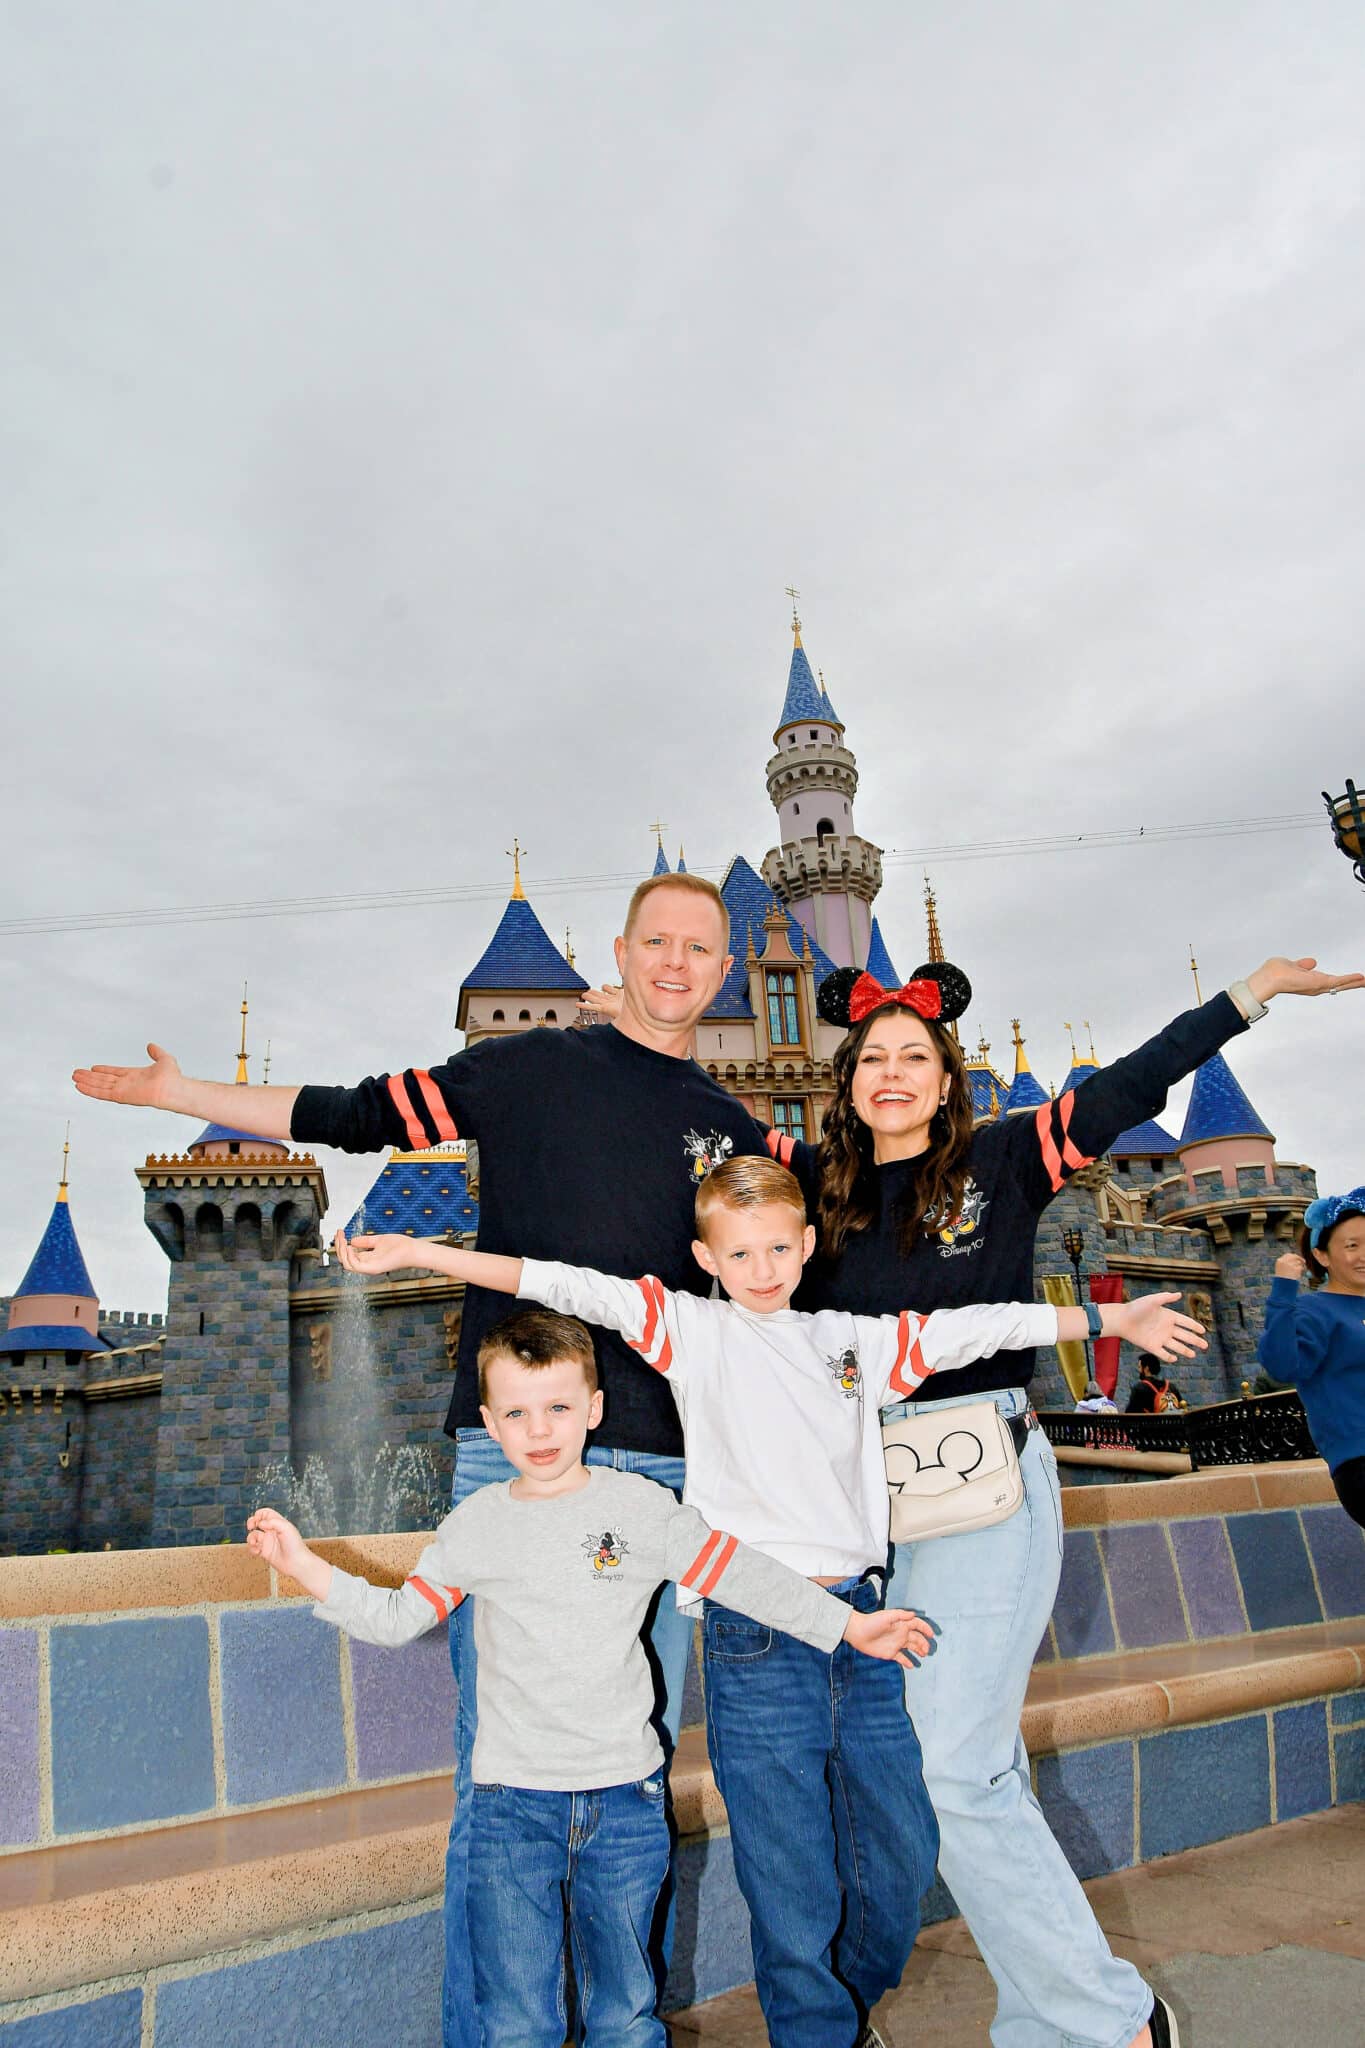 Family sharing their Disneyland outfits wearing matching Disneyland Spirit Jerseys in front of the castle. 